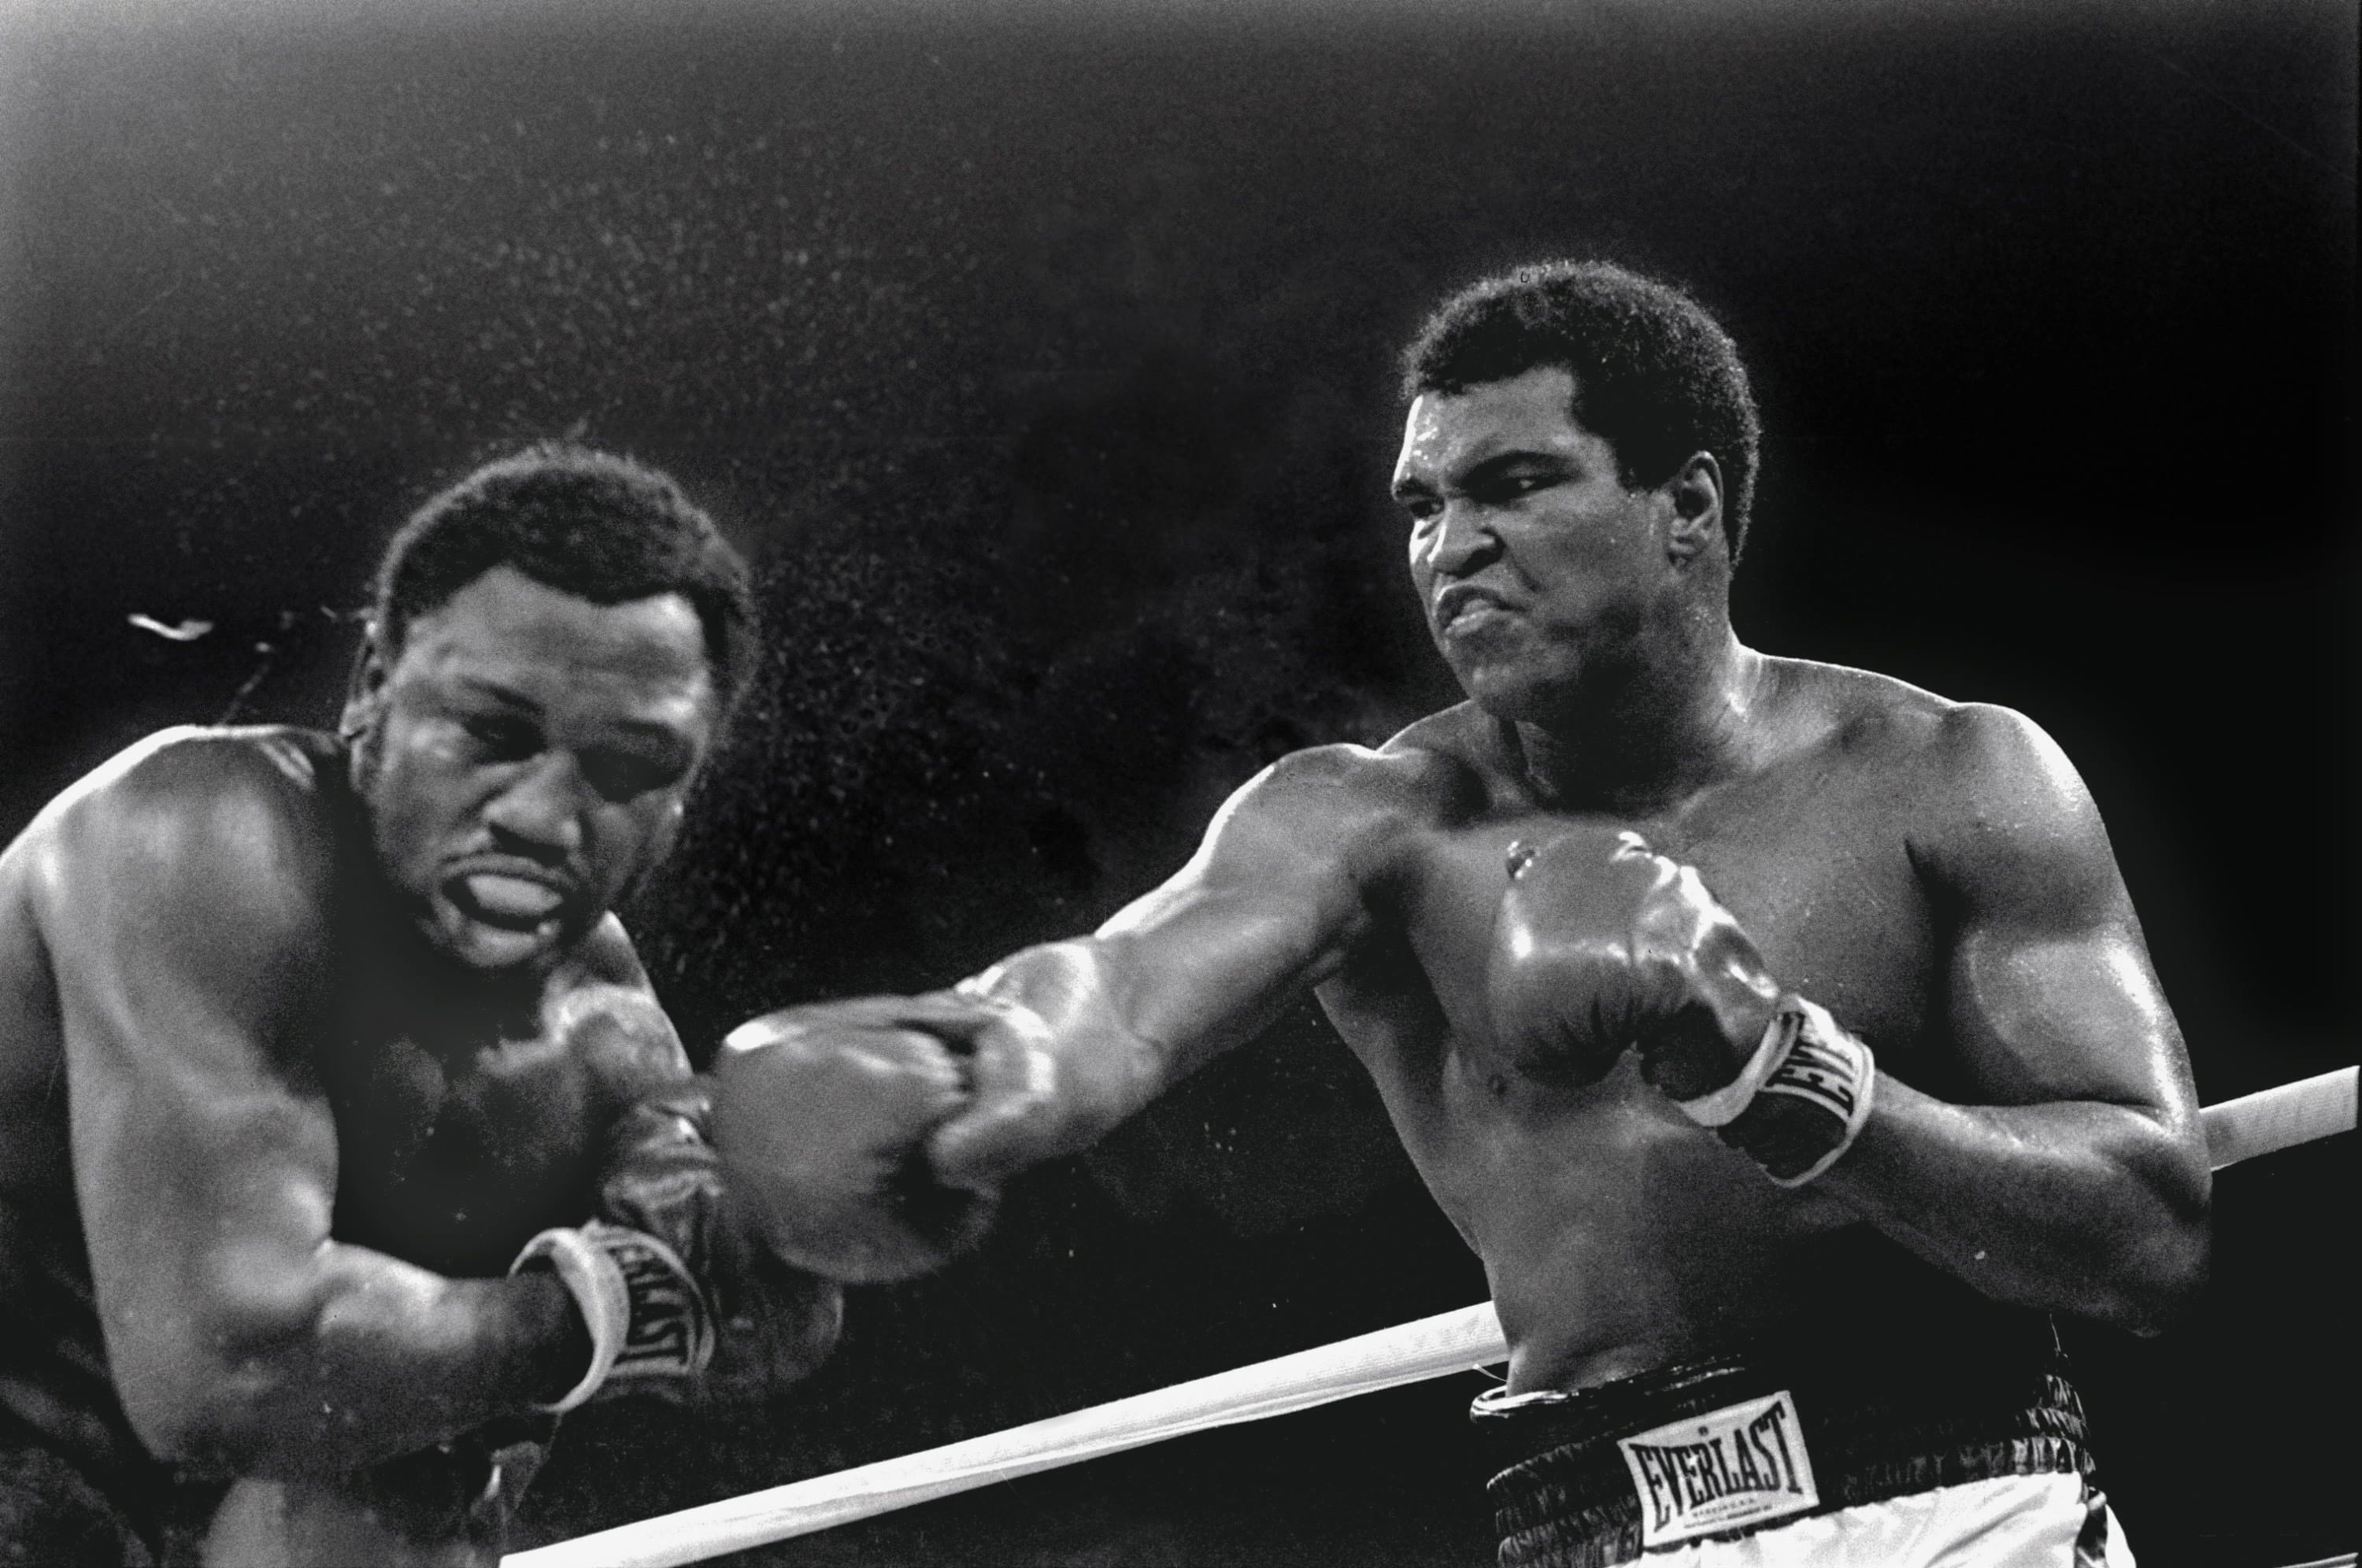 Heavyweight champion Muhammad Ali connects with a right against challenger Joe Frazier in the ninth round of their title fight in Manila, Philippines, on Oct. 1, 1975. Ali won the fight on a decision to retain the title. Ali, the magnificent heavyweight champion whose fast fists and irrepressible personality transcended sports and captivated the world, has died according to a statement released by his family Friday, June 3, 2016. He was 74.